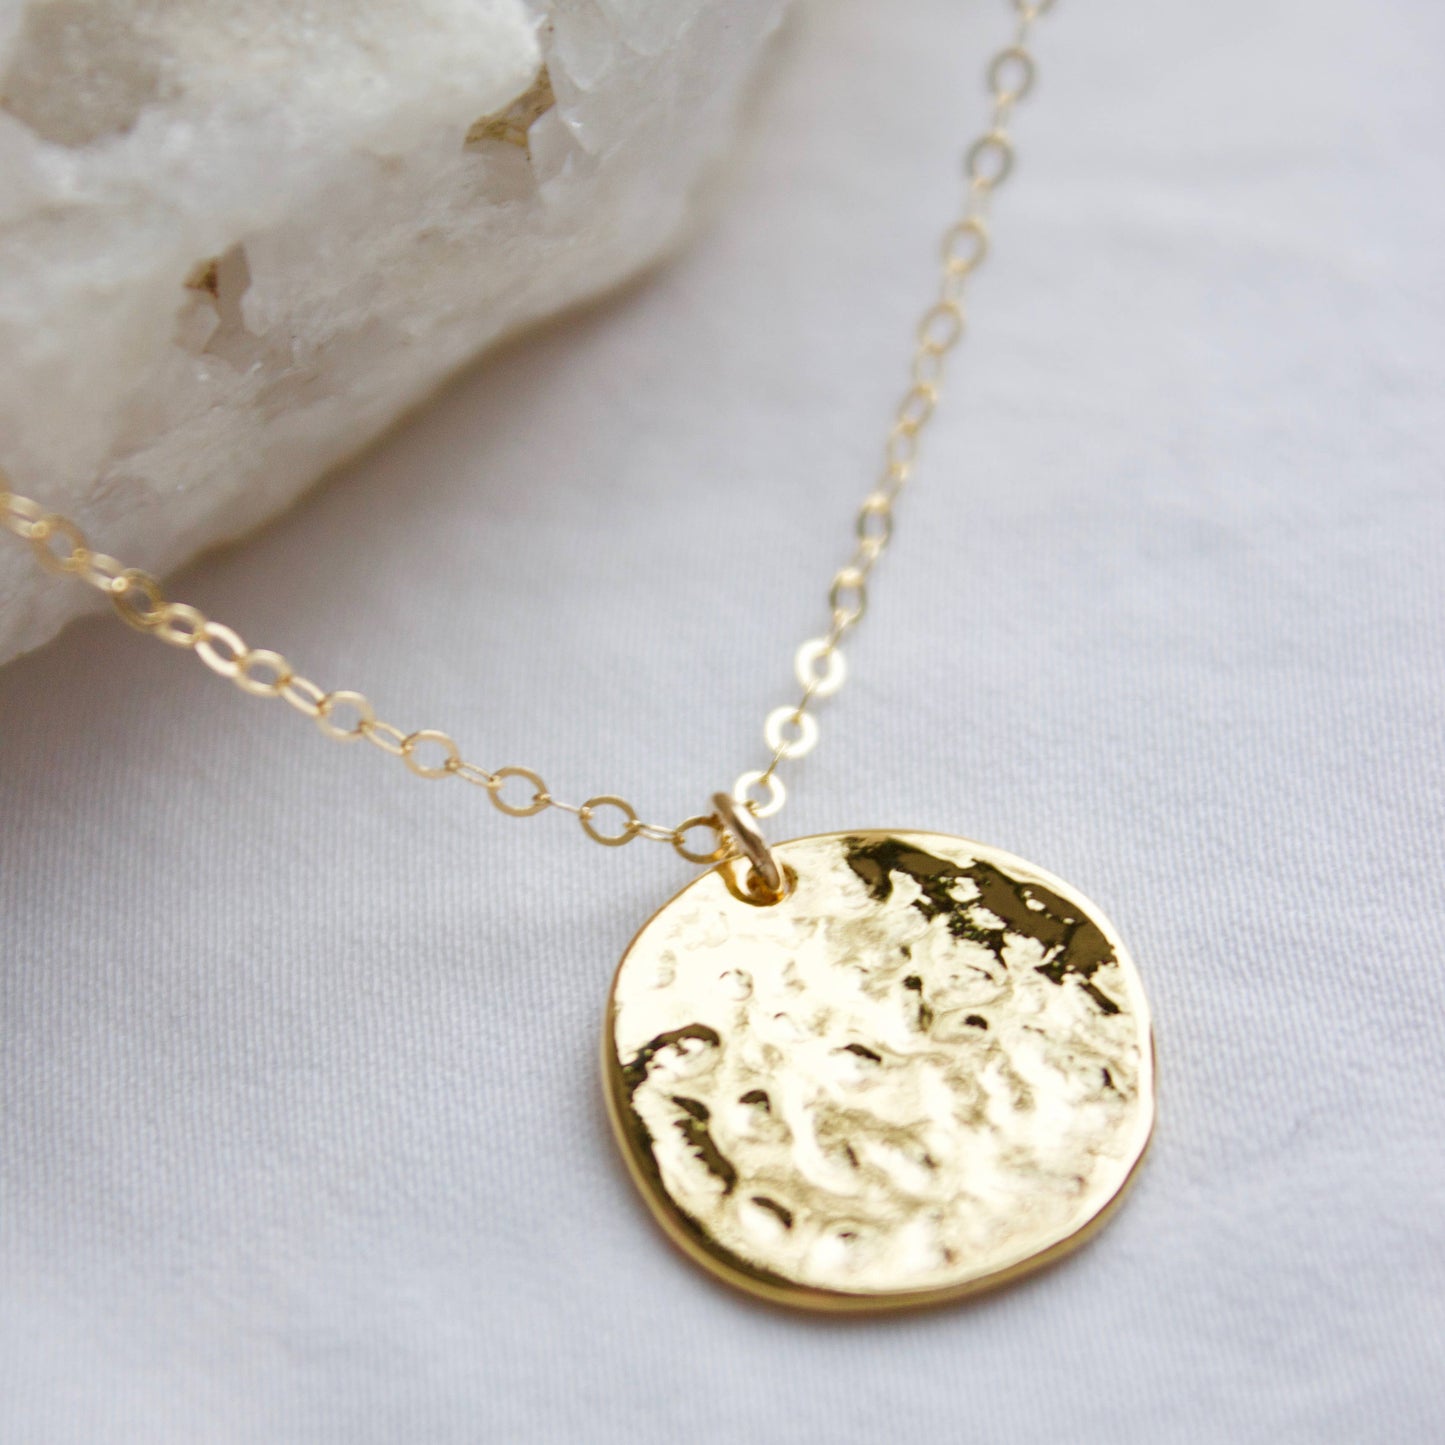 POUNDED DISK NECKLACE: Gold